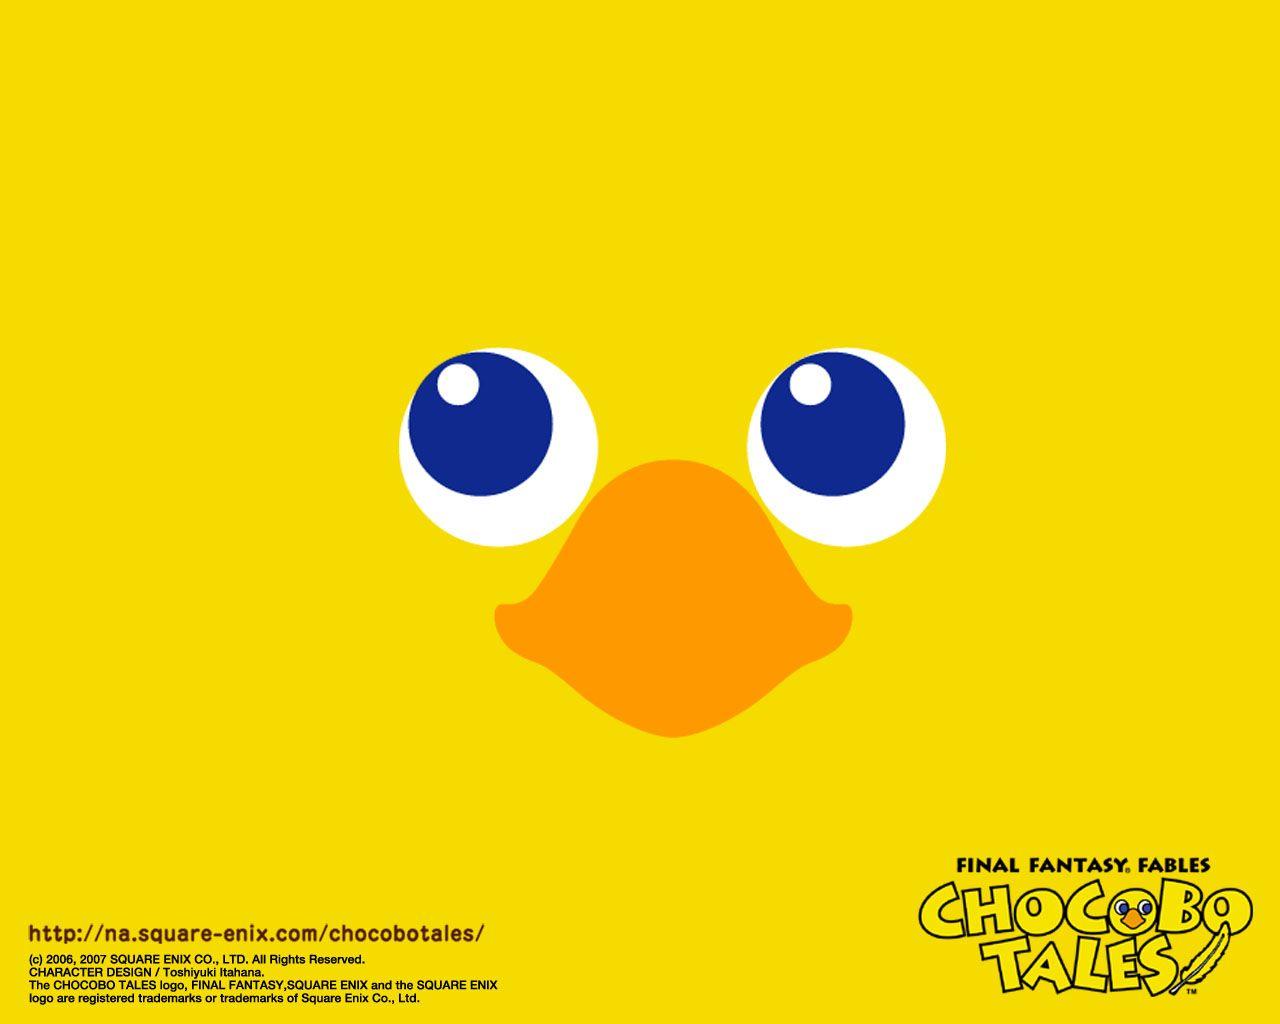 Final Fantasy Fables: Chocobo Tales wallpaper